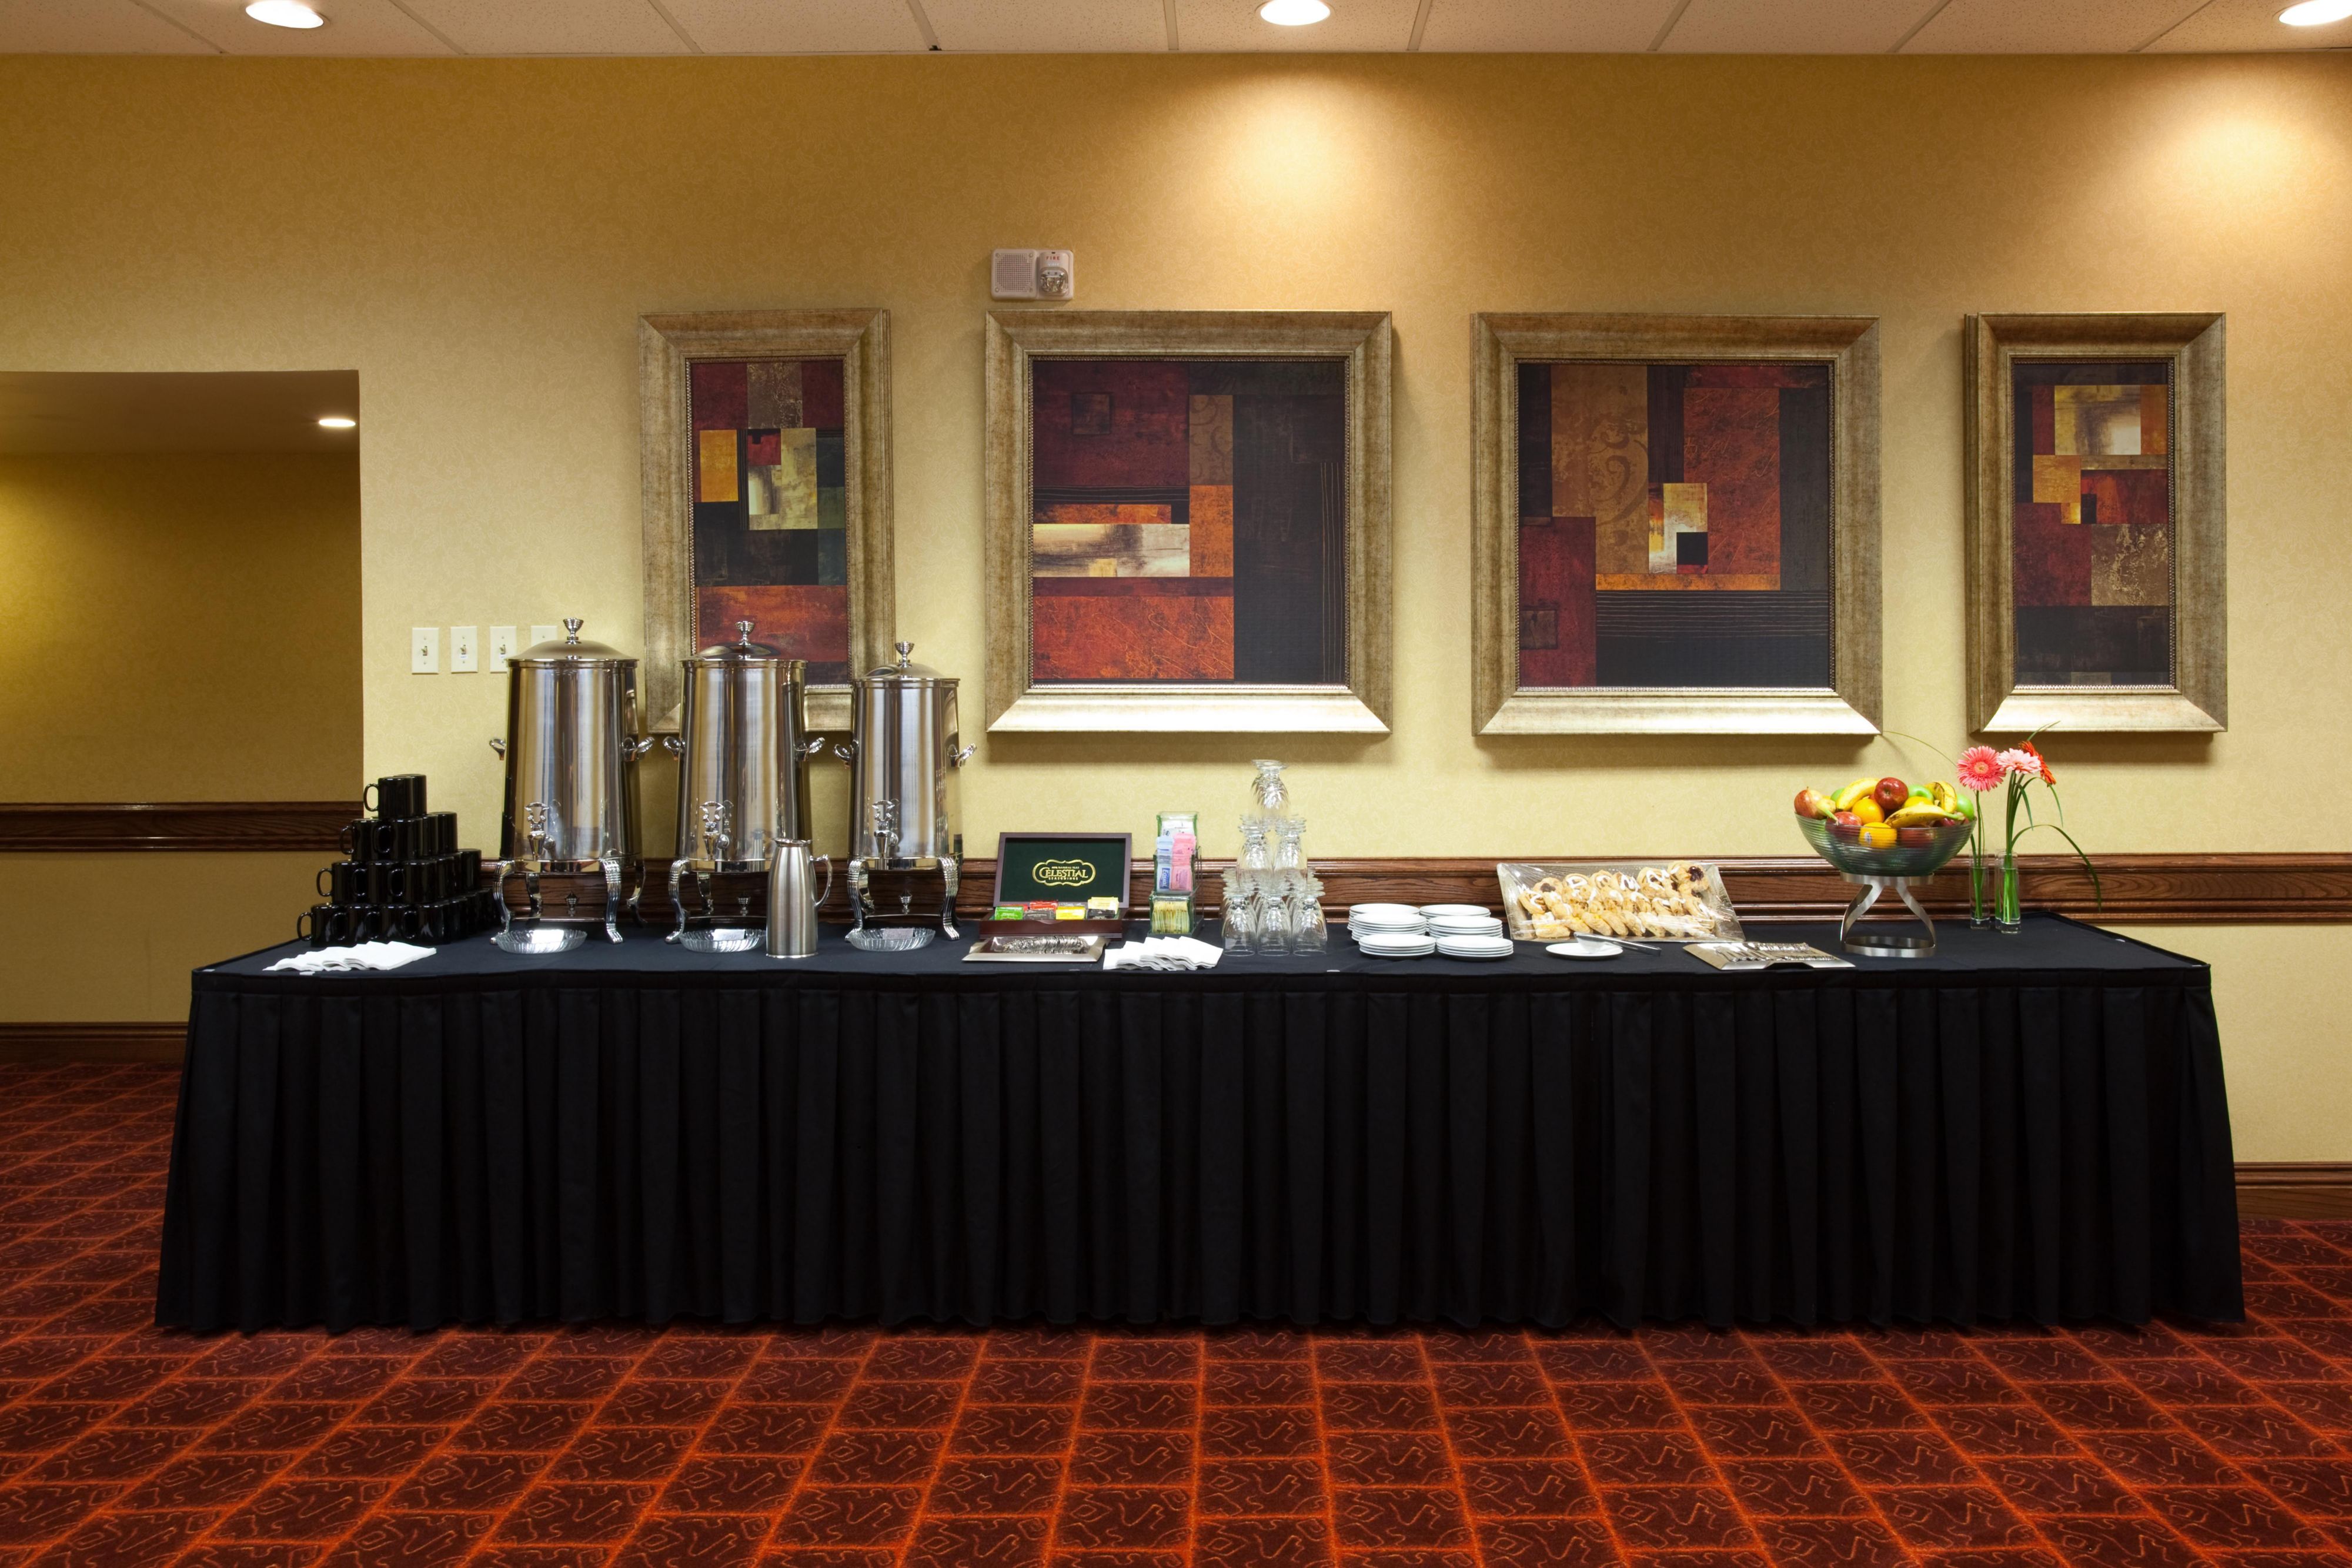 Full five-star amenities with in-house catering, coffee and tea.